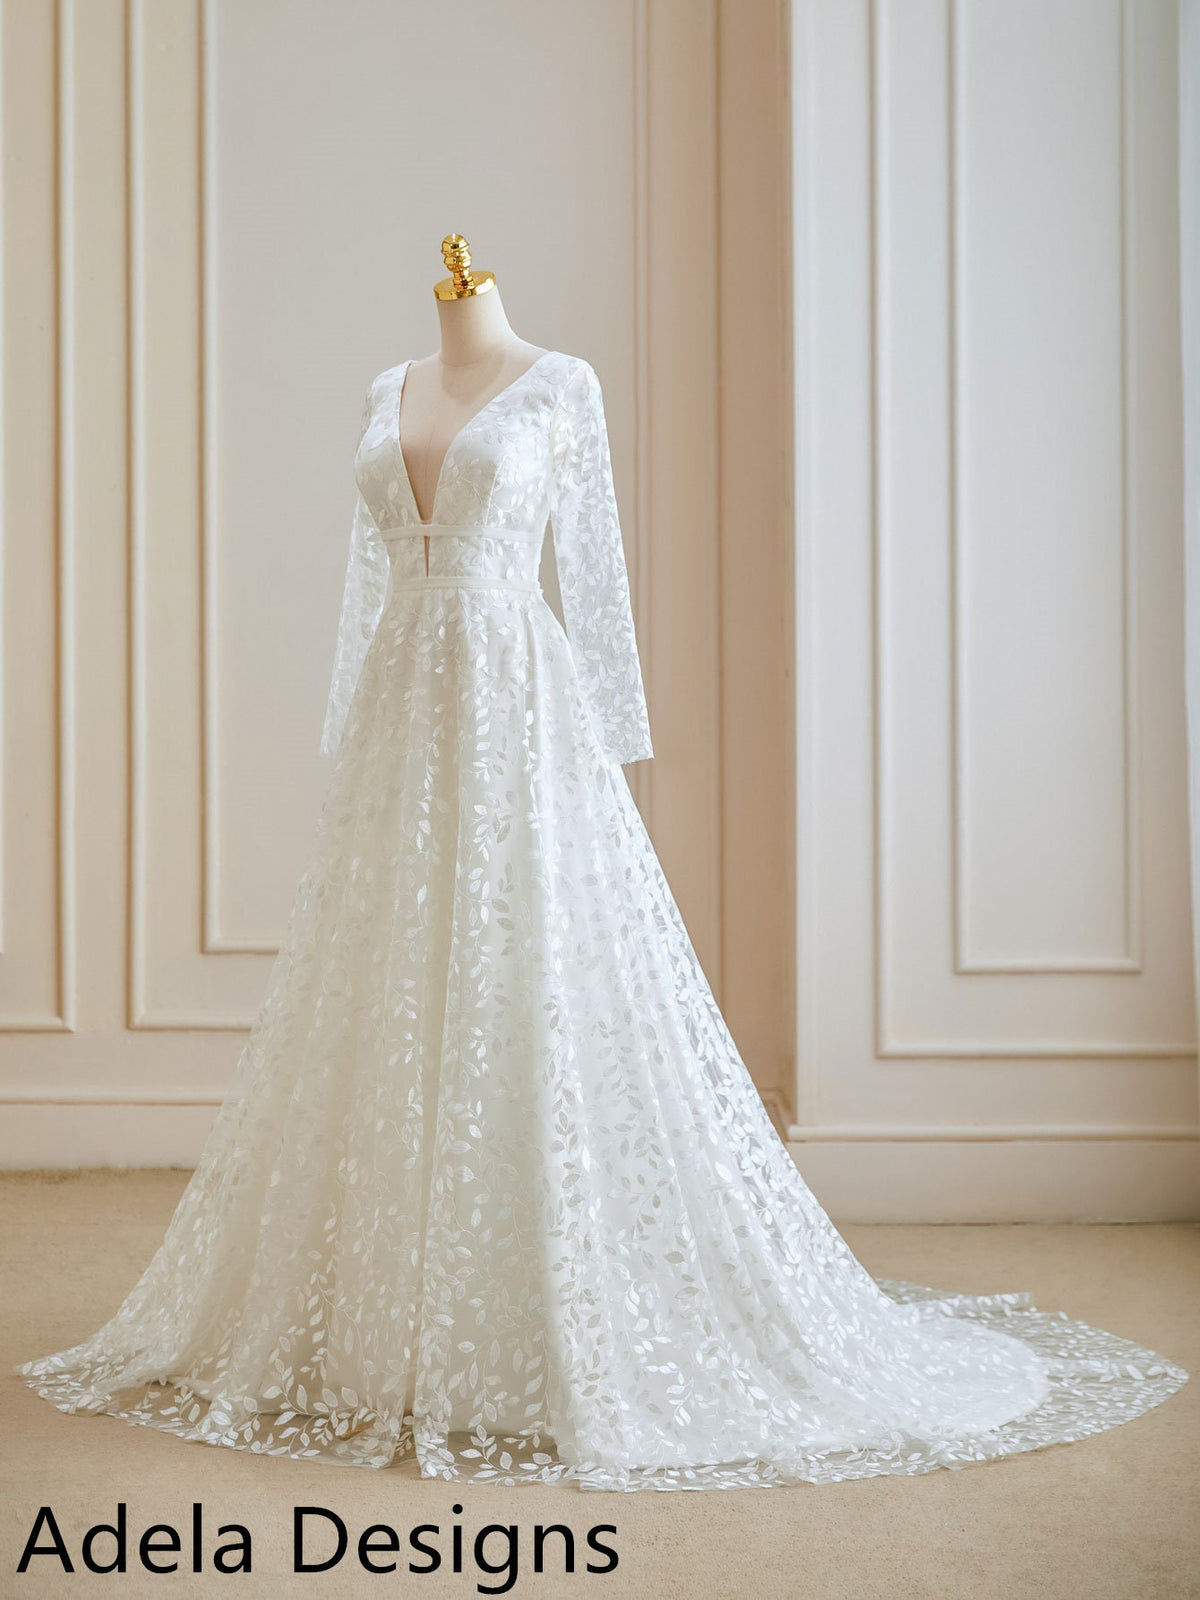 Simple Lace Aline Boho Wedding Dress Long Sleeve Bridal Gown Deep V Neckline Illusion Sleeves All Over Lace Design Open Back Sexy Style